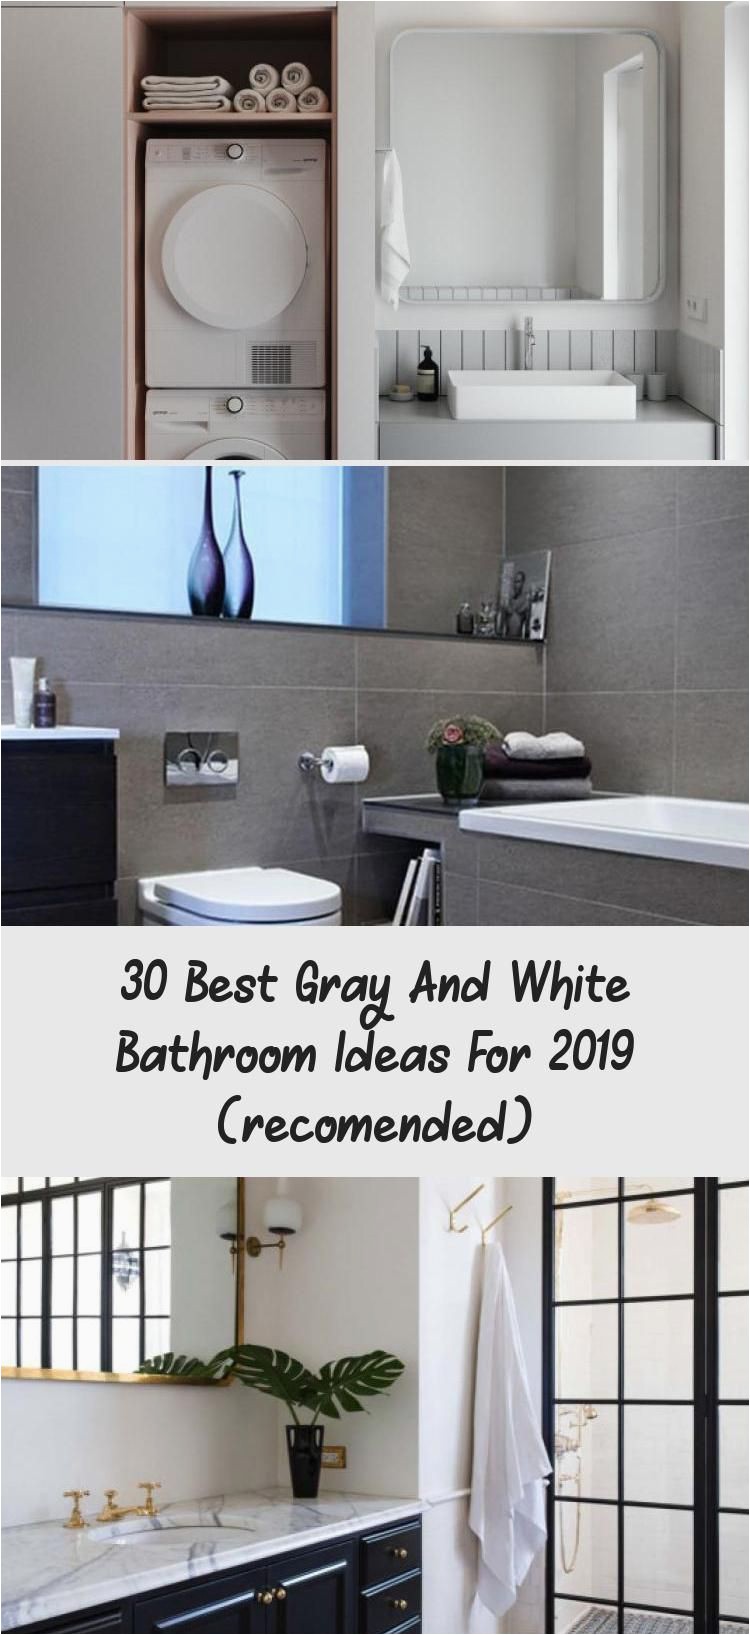 Best Bathroom Rugs 2019 30 Best Gray and White Bathroom Ideas for 2019 Re Ended